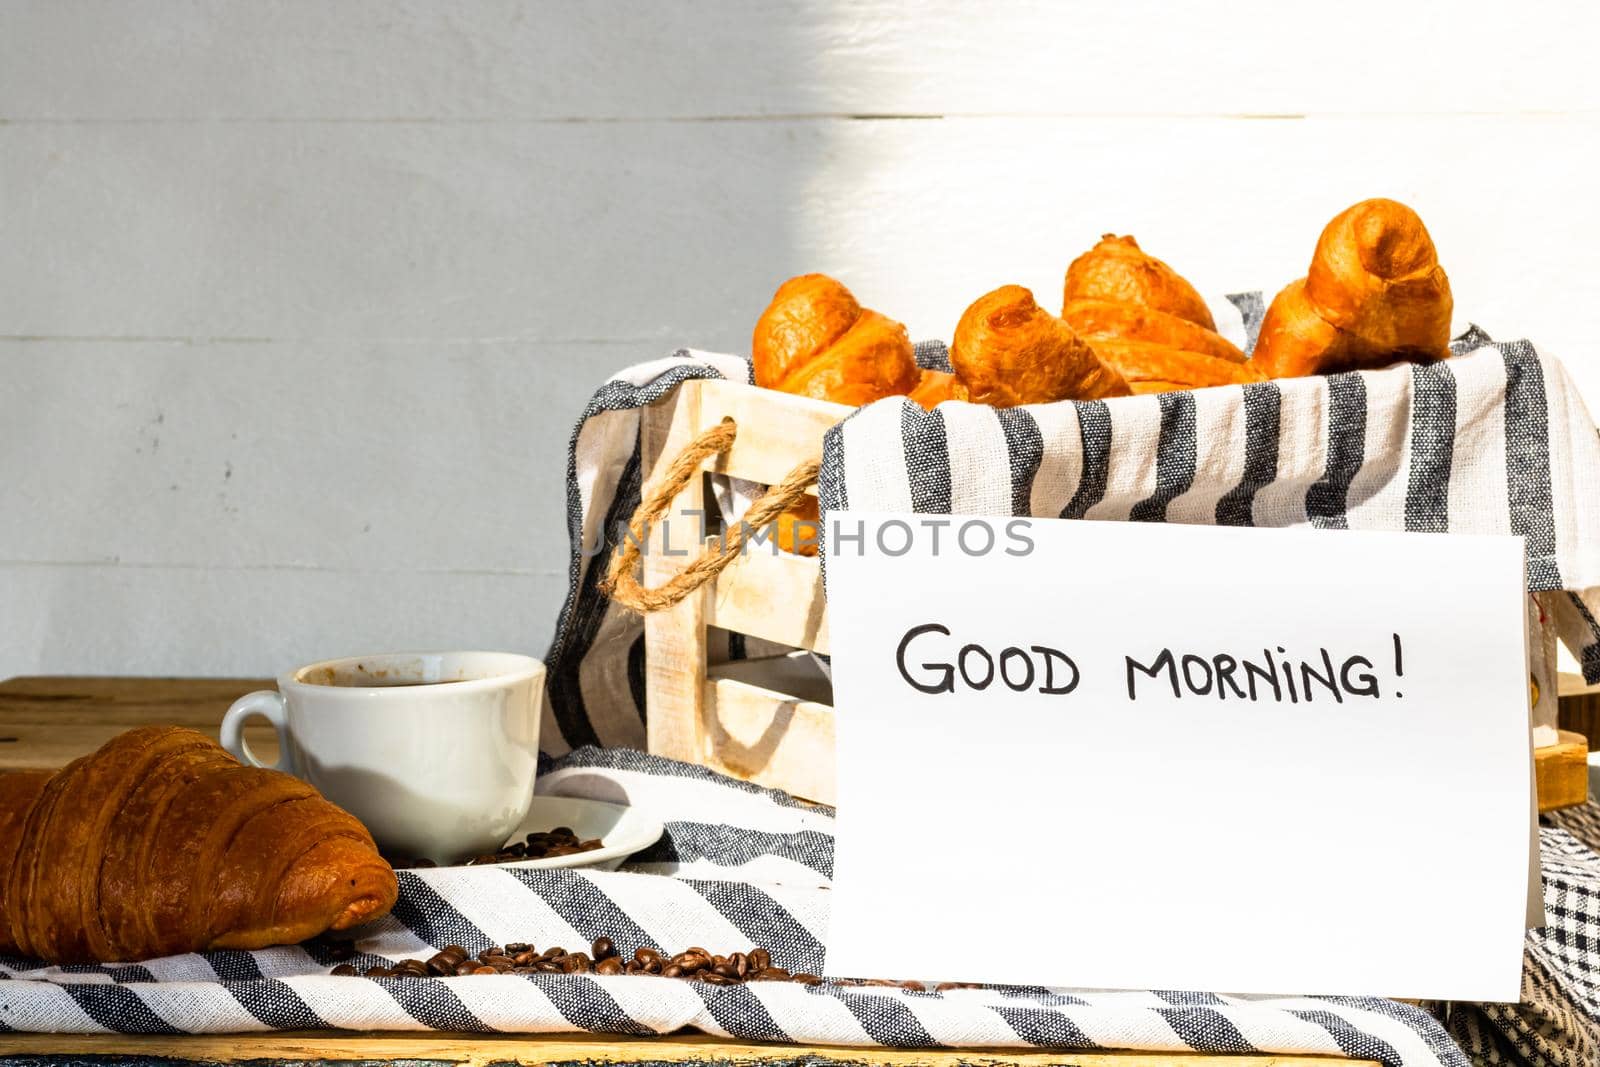 Coffee cup and buttered fresh French croissant on wooden crate. Food and breakfast concept. Morning message “good morning” on white board by vladispas